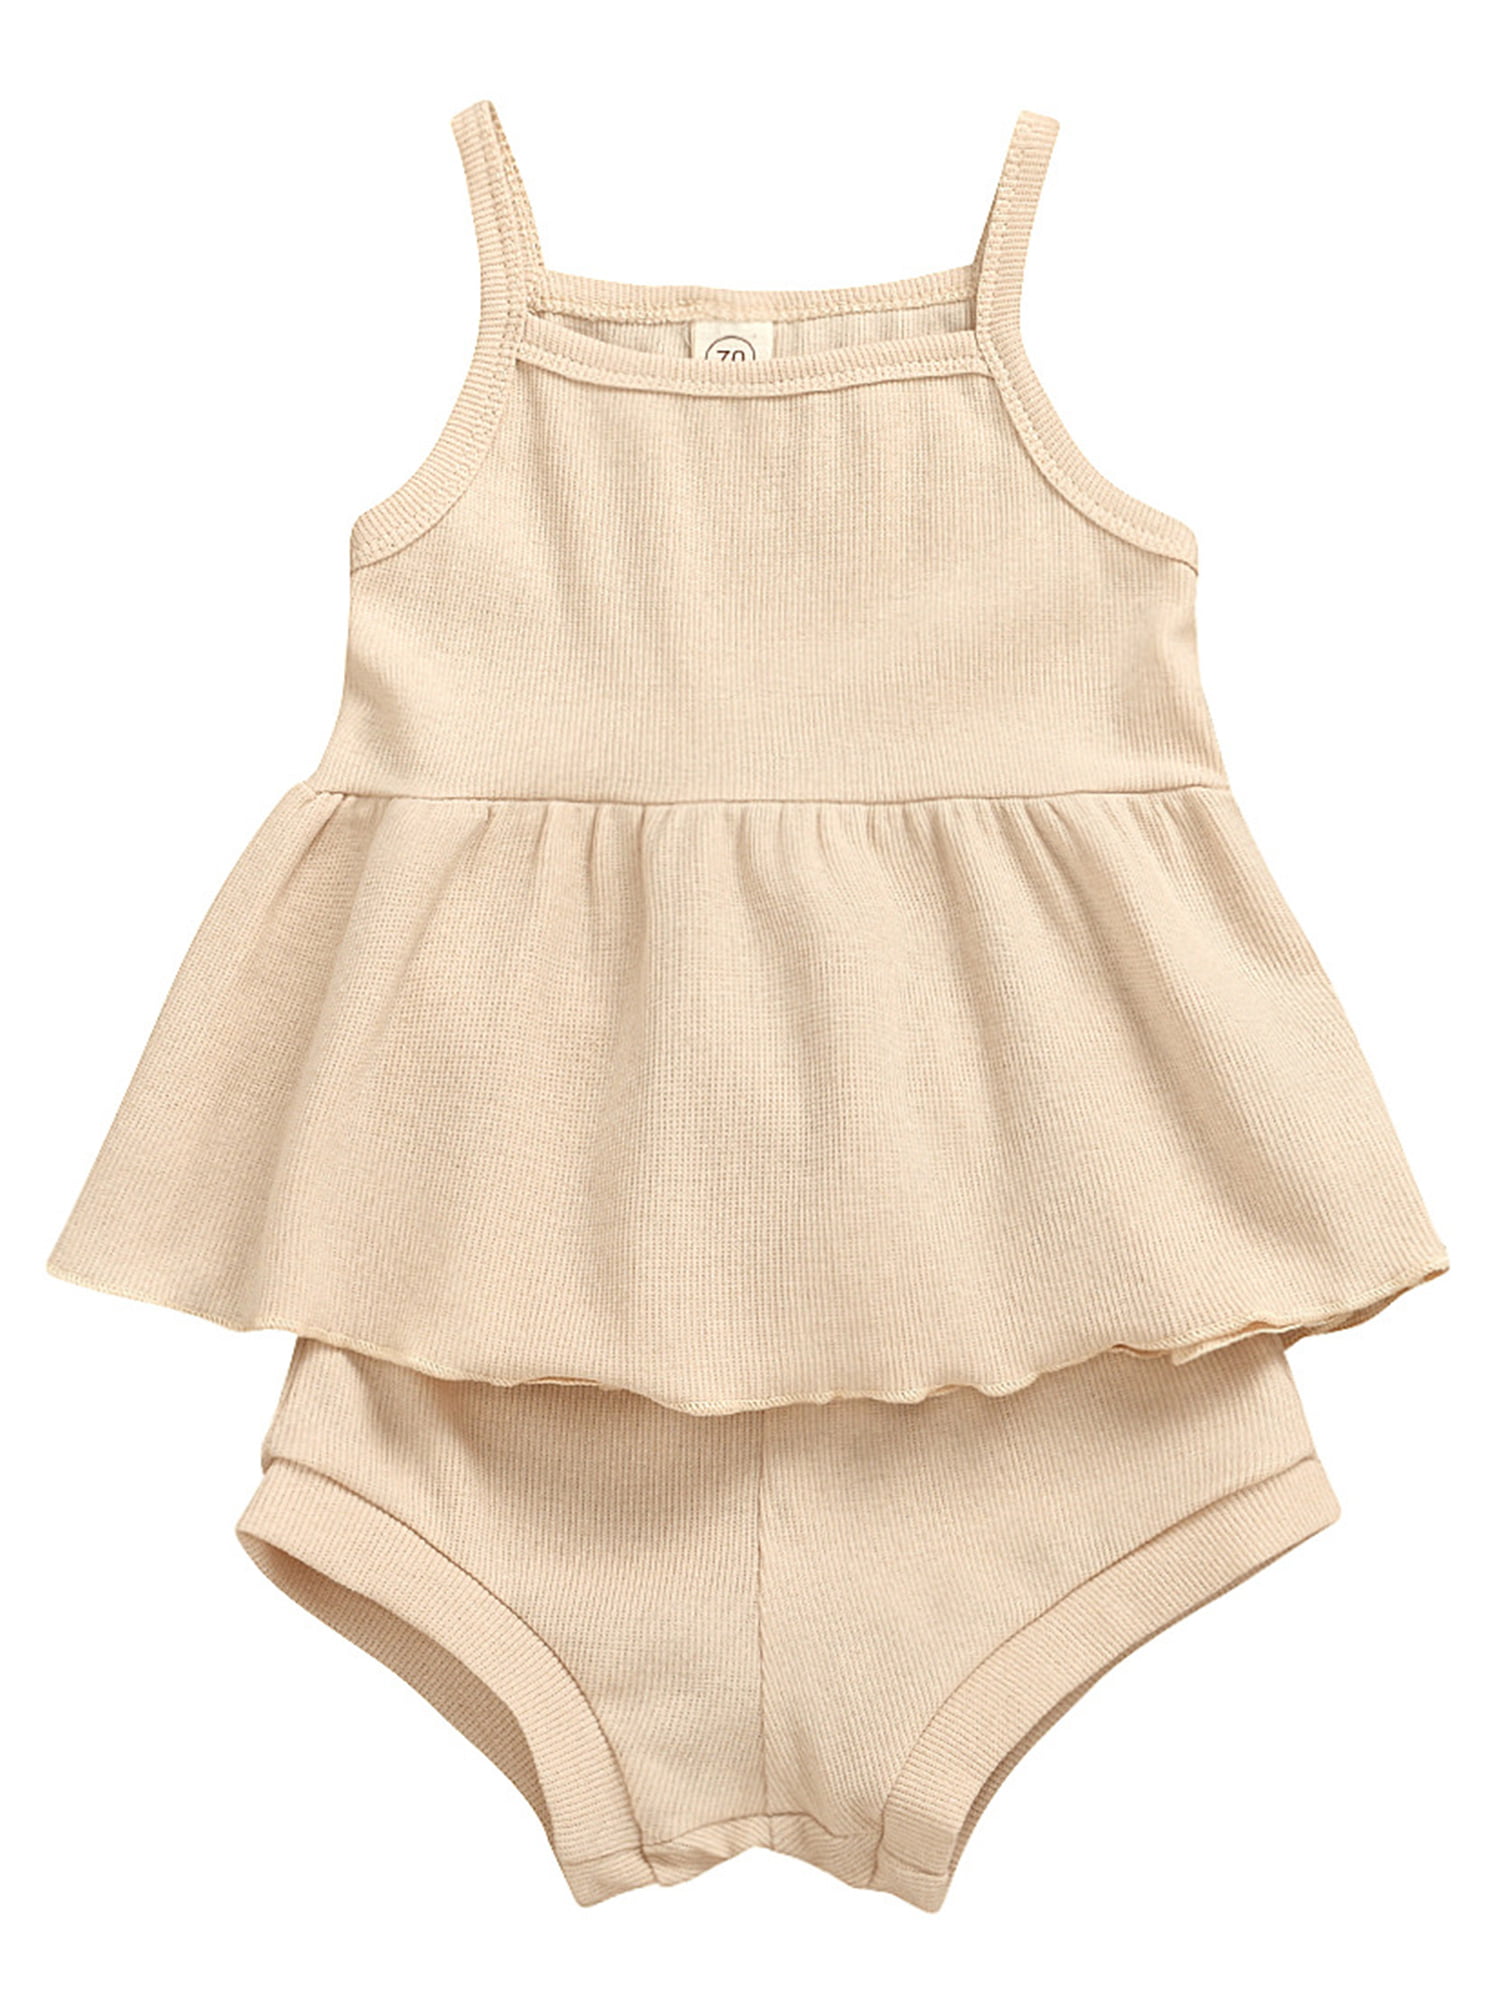 Baby Boys Girls Ribbed Bodysuit Outfit 